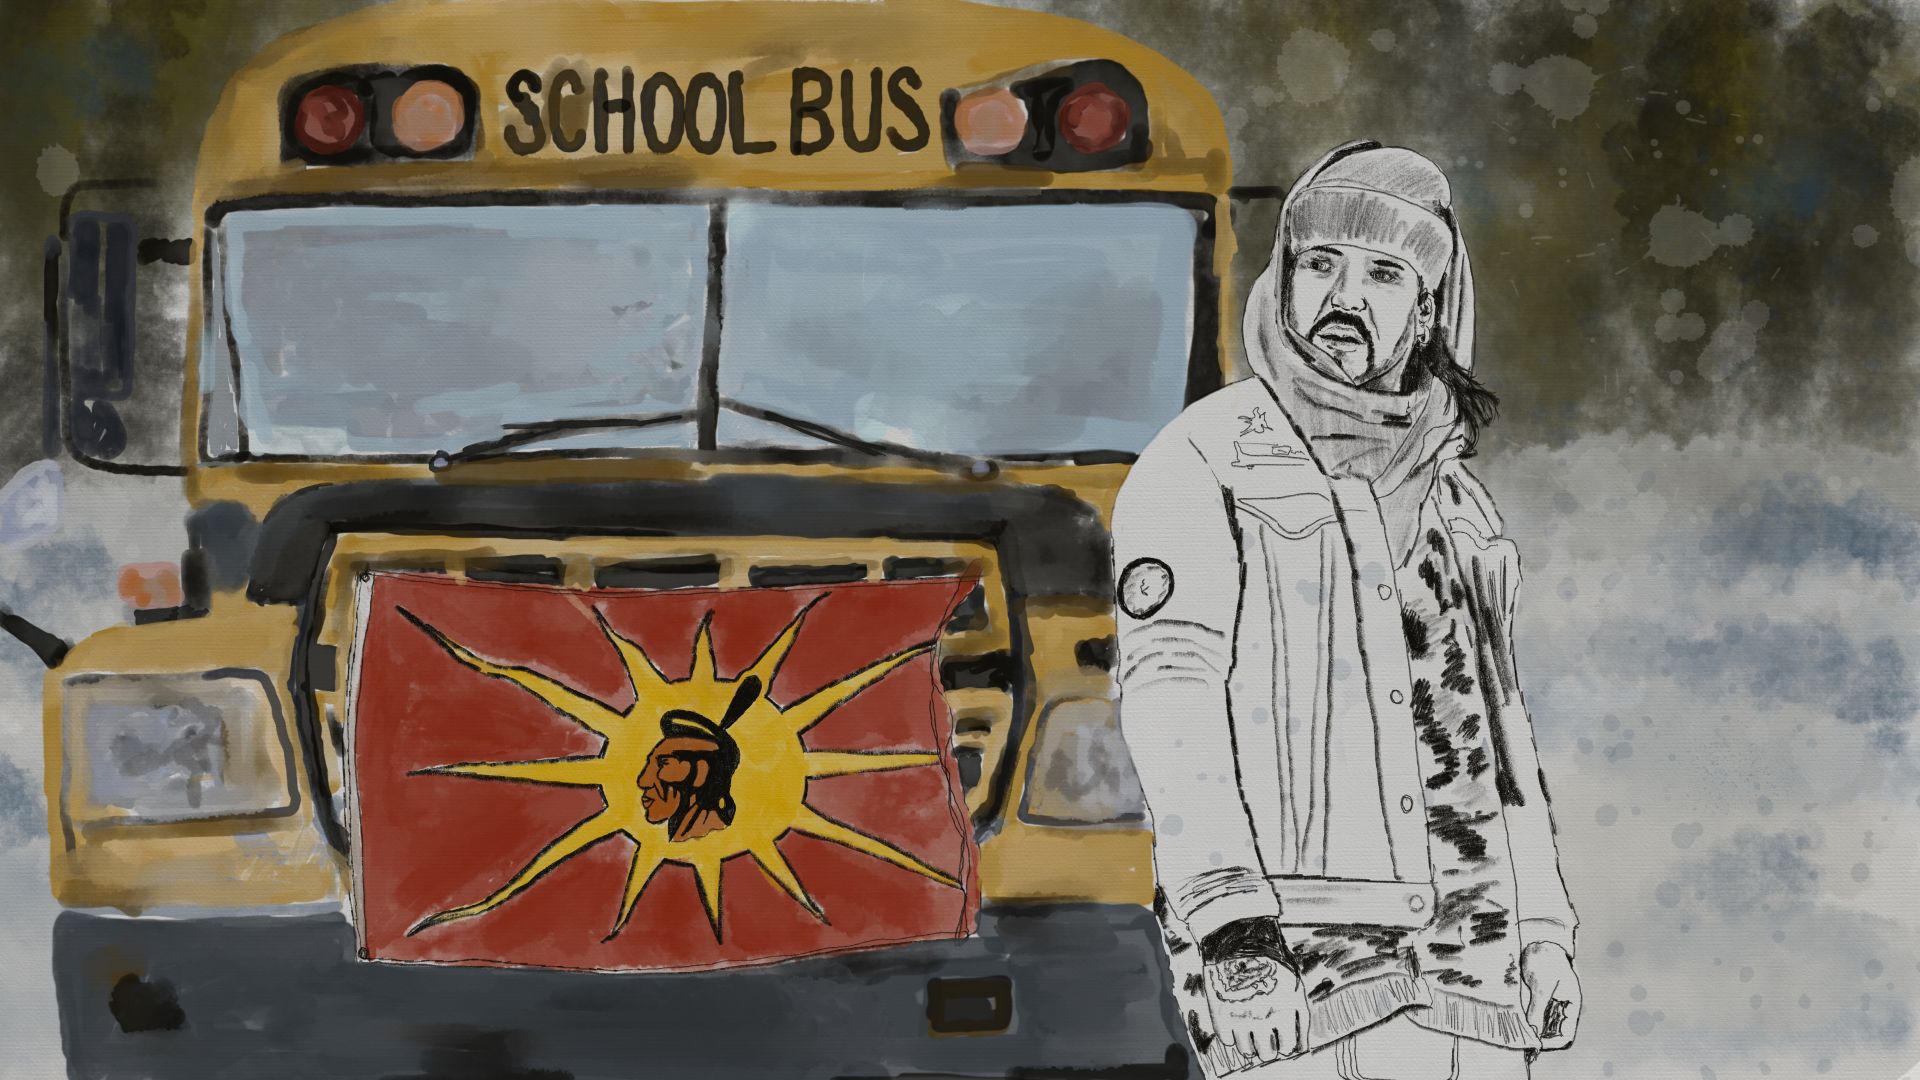 An illustration shows land defender Logan Staats standing in front of an old yellow school bus with a warrior or unity flag attached to the front of it. The red flag depicts an Indigenous man with a single feather in his hair over a yellow sunburst.